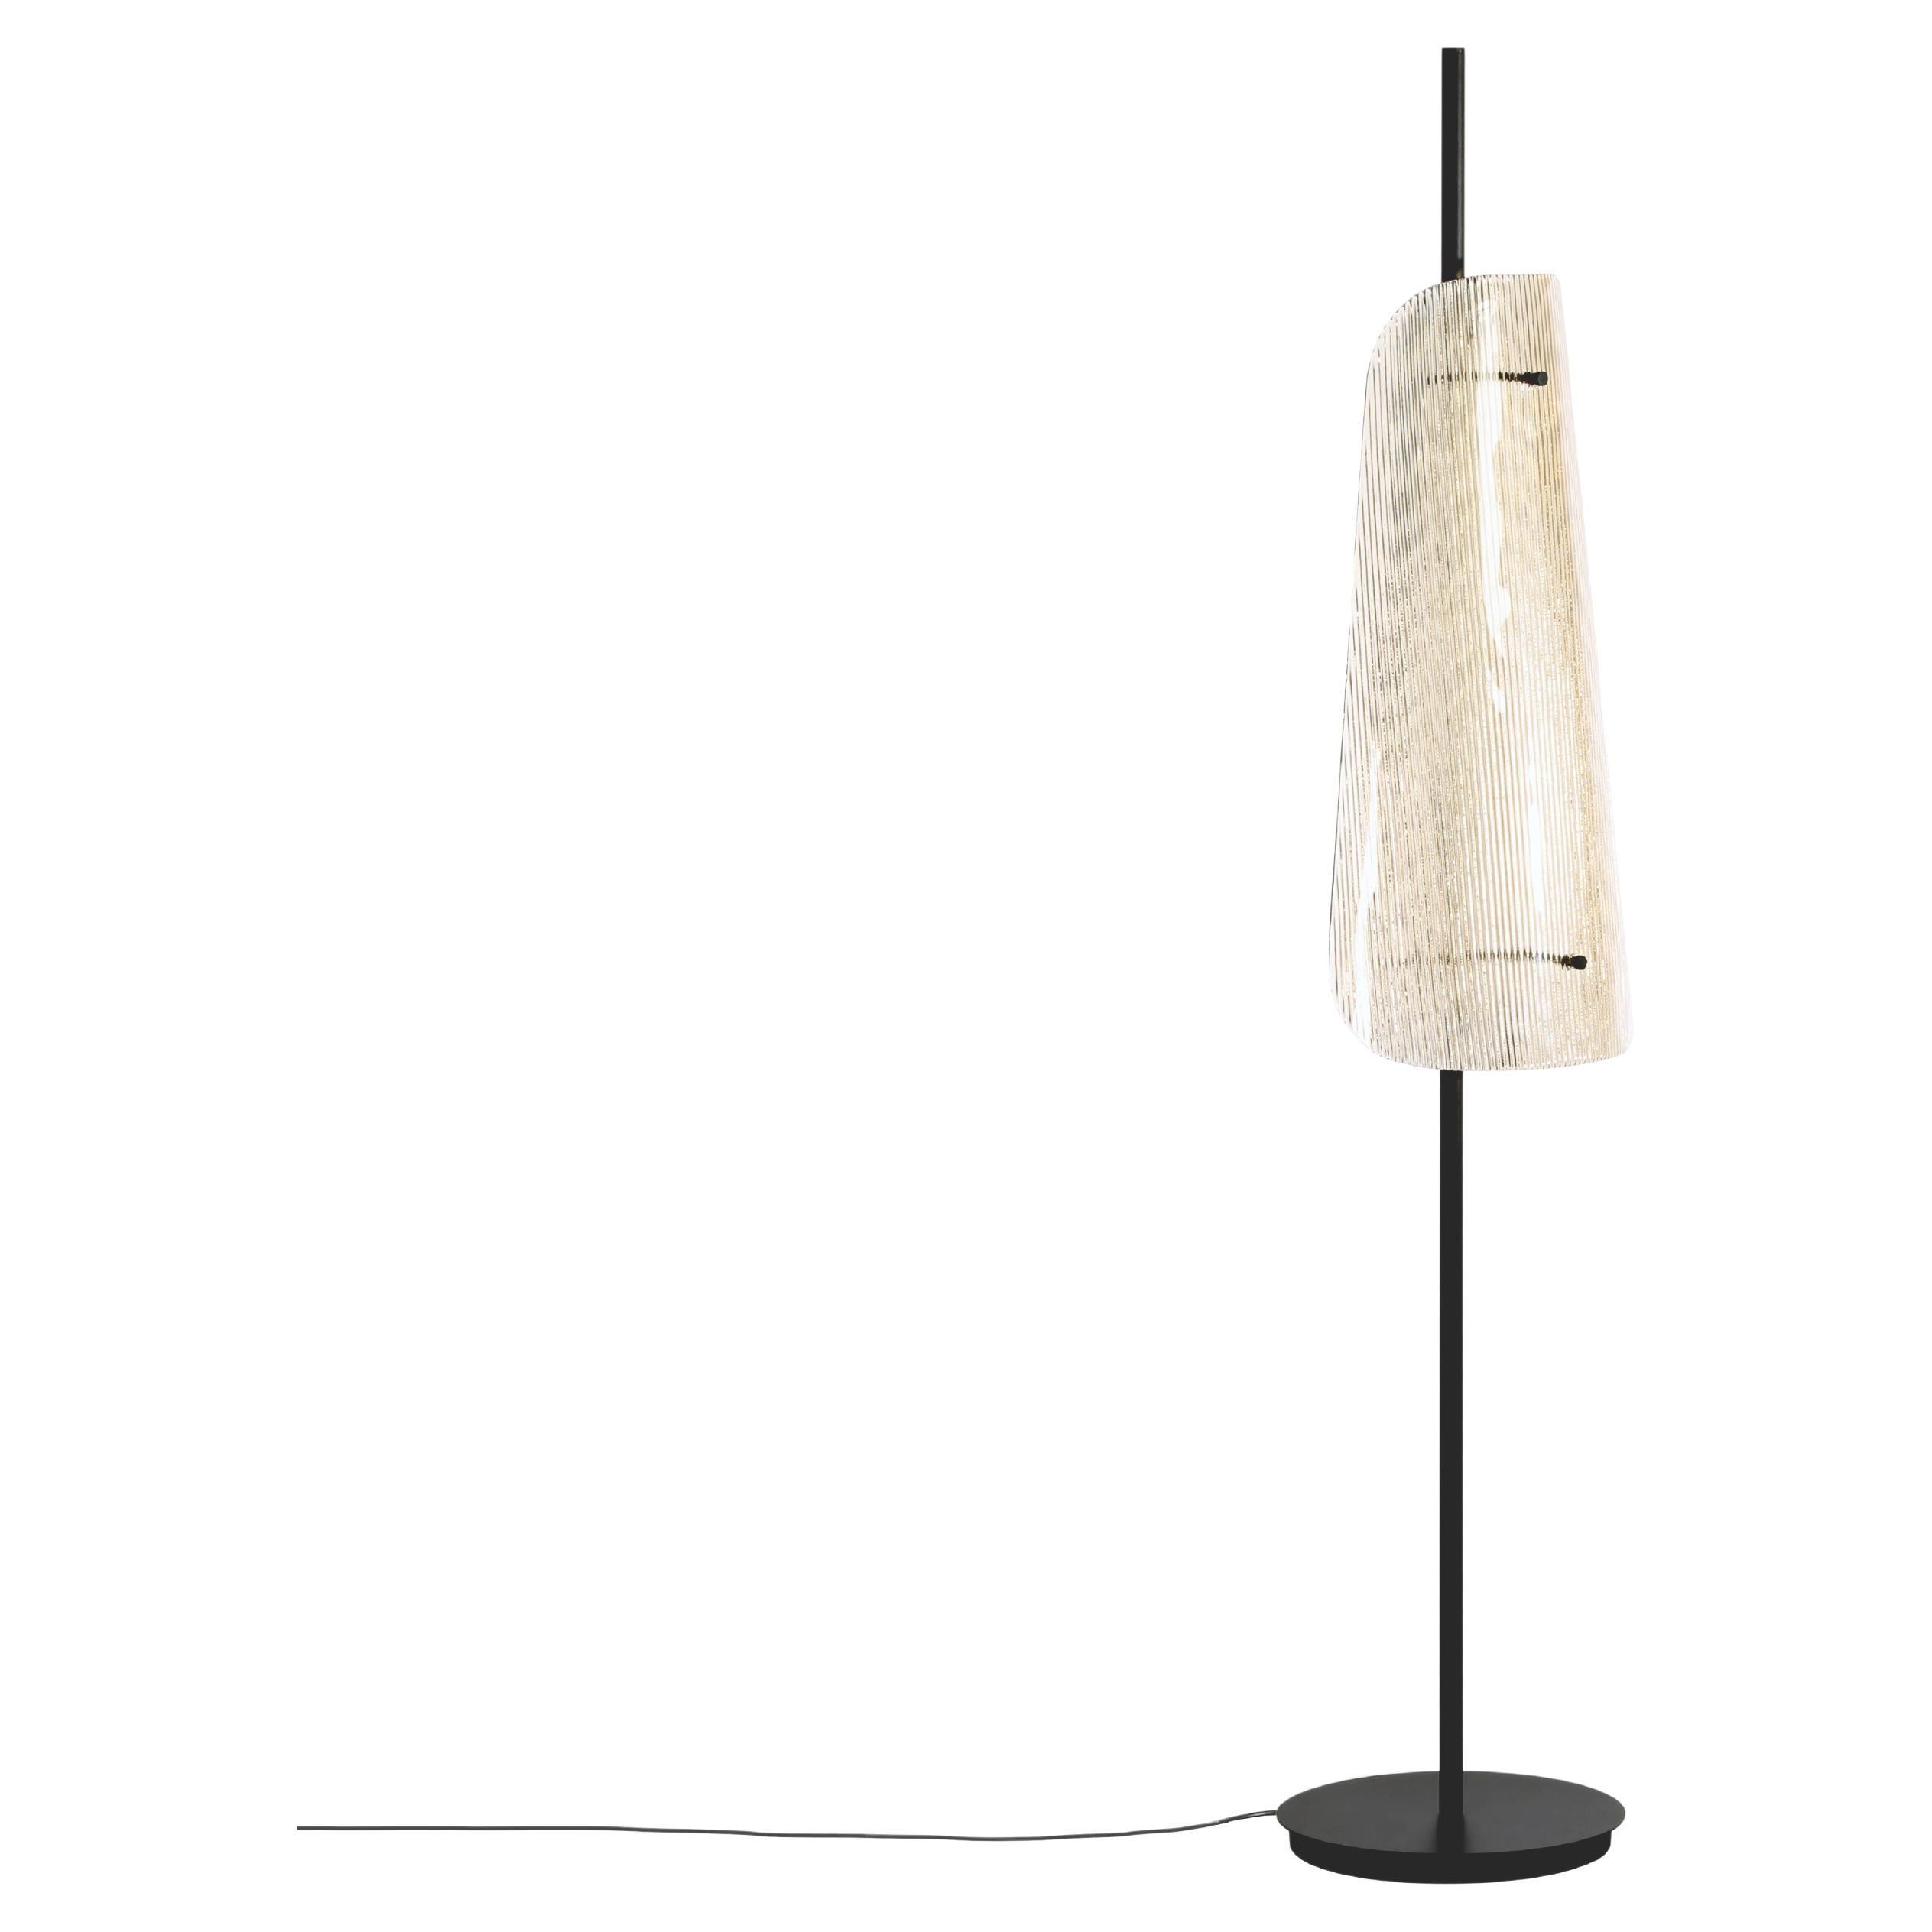 Bent One Smoky Grey Black Floor Lamp by Pulpo
Dimensions: D34 x H164 cm
Materials: steel powder coated, casted glass, textile

Also available in different finishes: smoky grey black, transparent black, smoky grey champagner, transparent champagner.